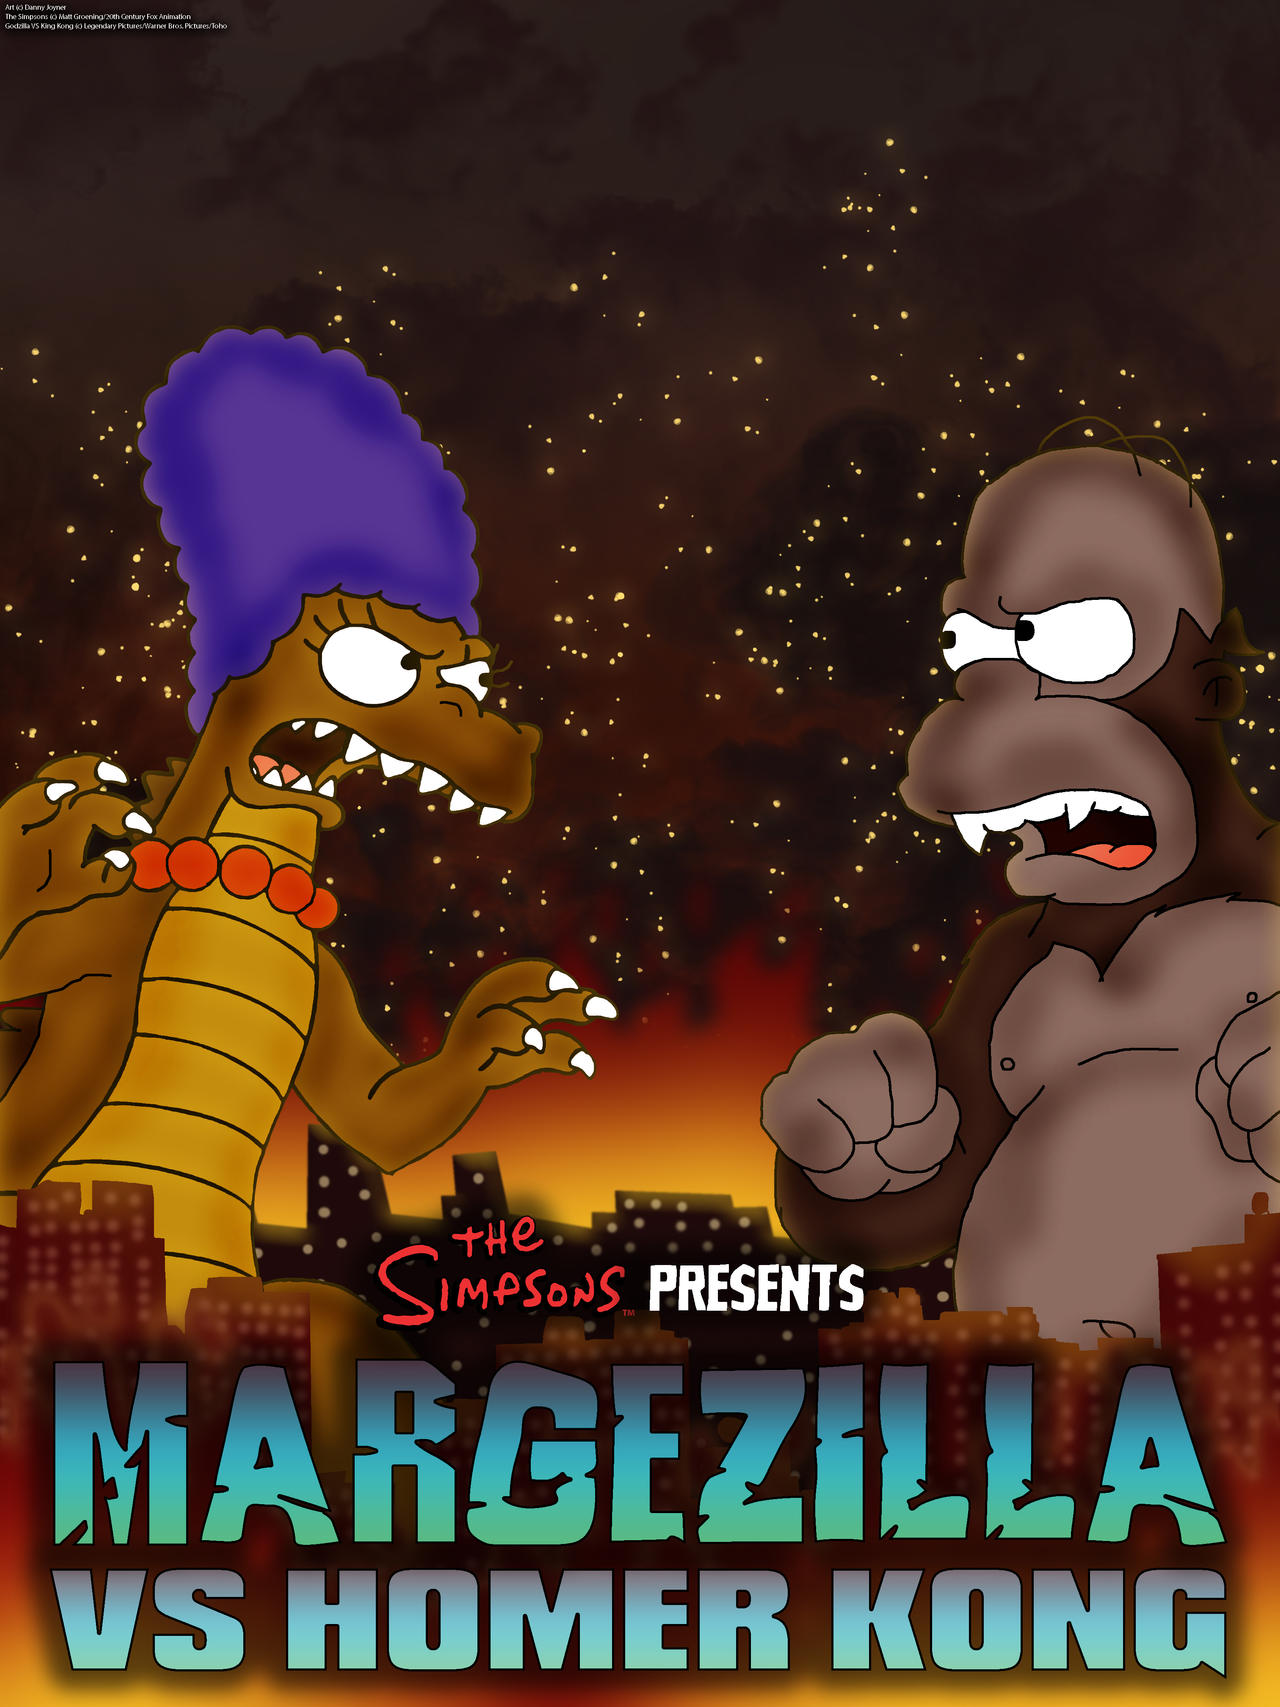 King Kong - Wikisimpsons, the Simpsons Wiki